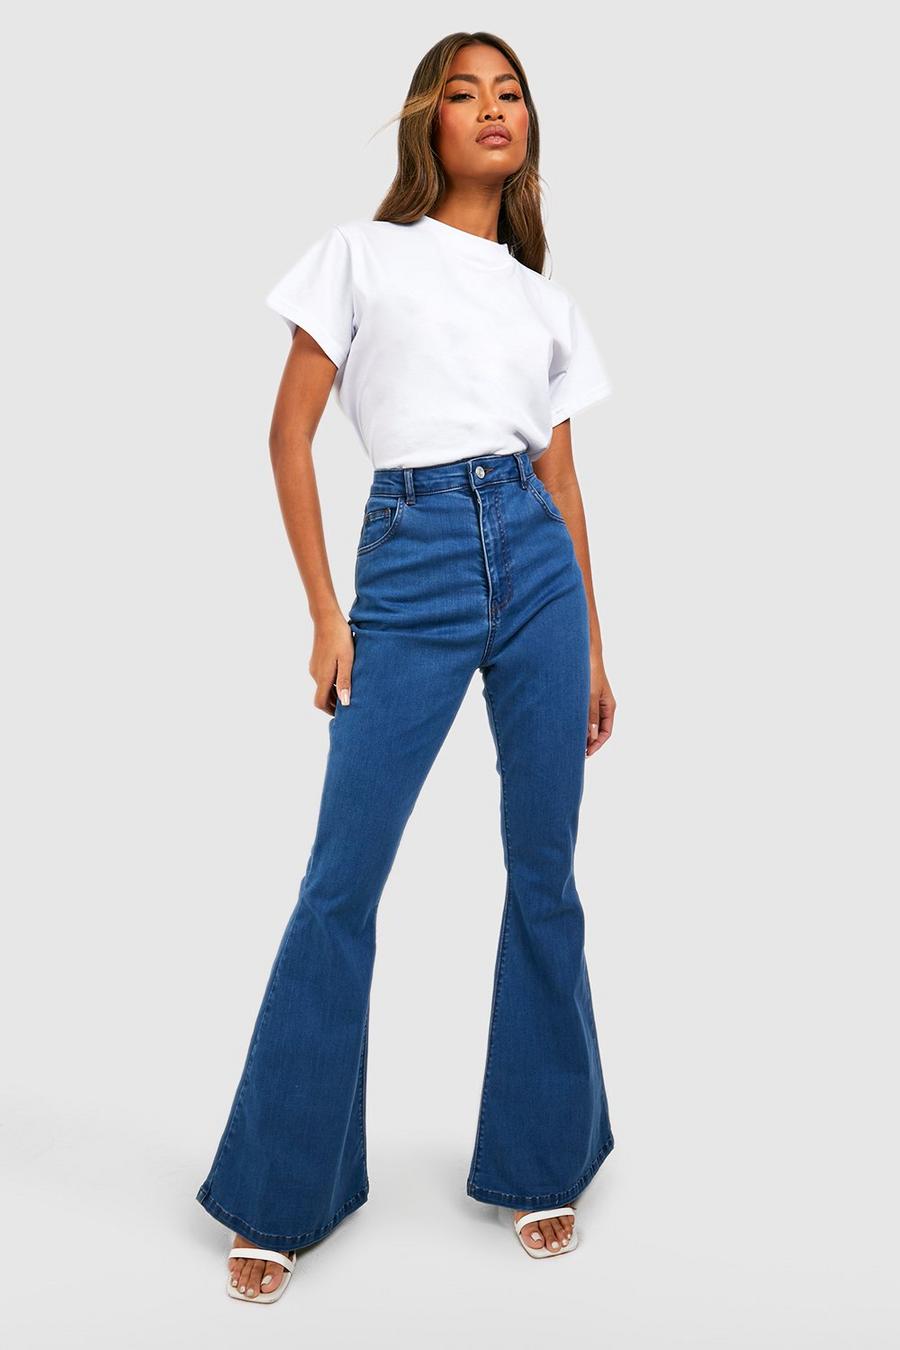 Women's Bum Lifting High Waisted Flared Jeans